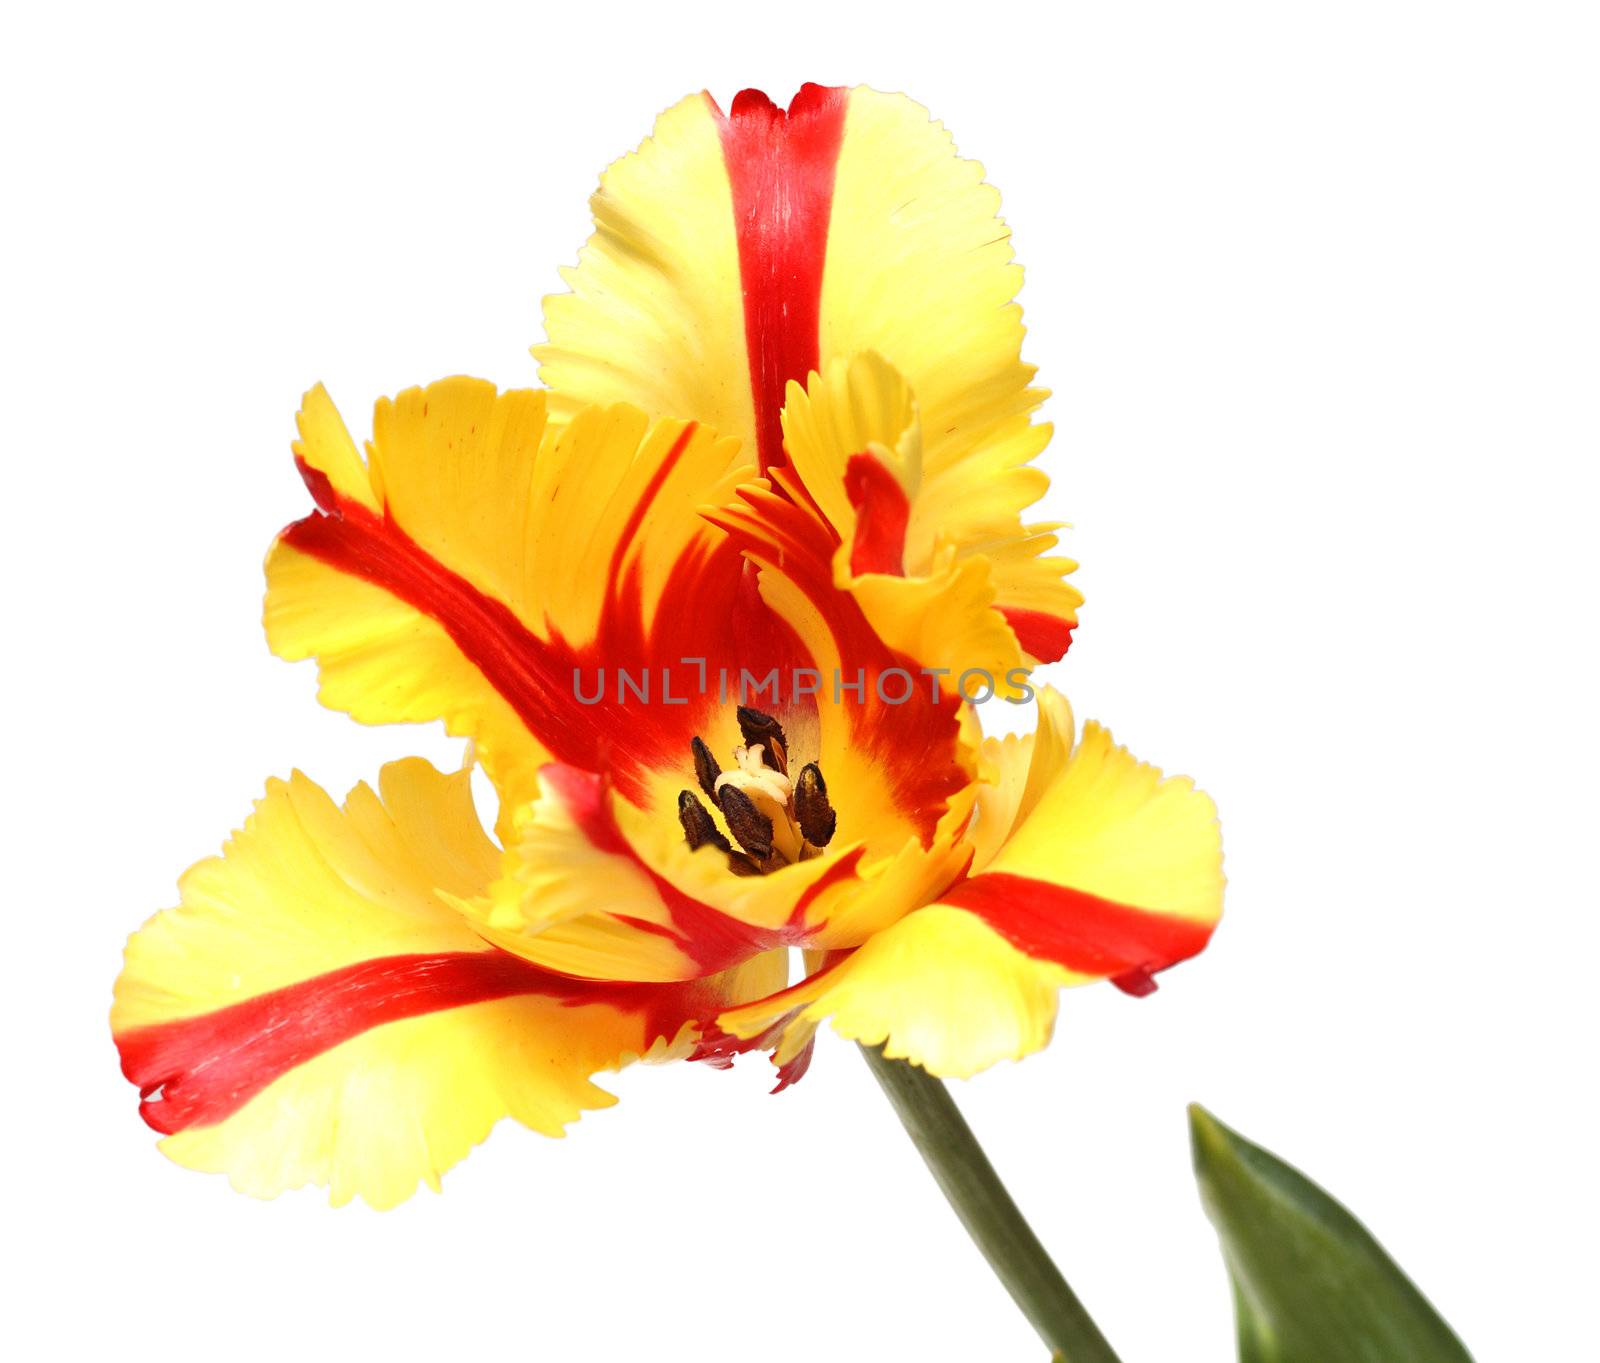 close-up view on red-yellow tulip isolated on white